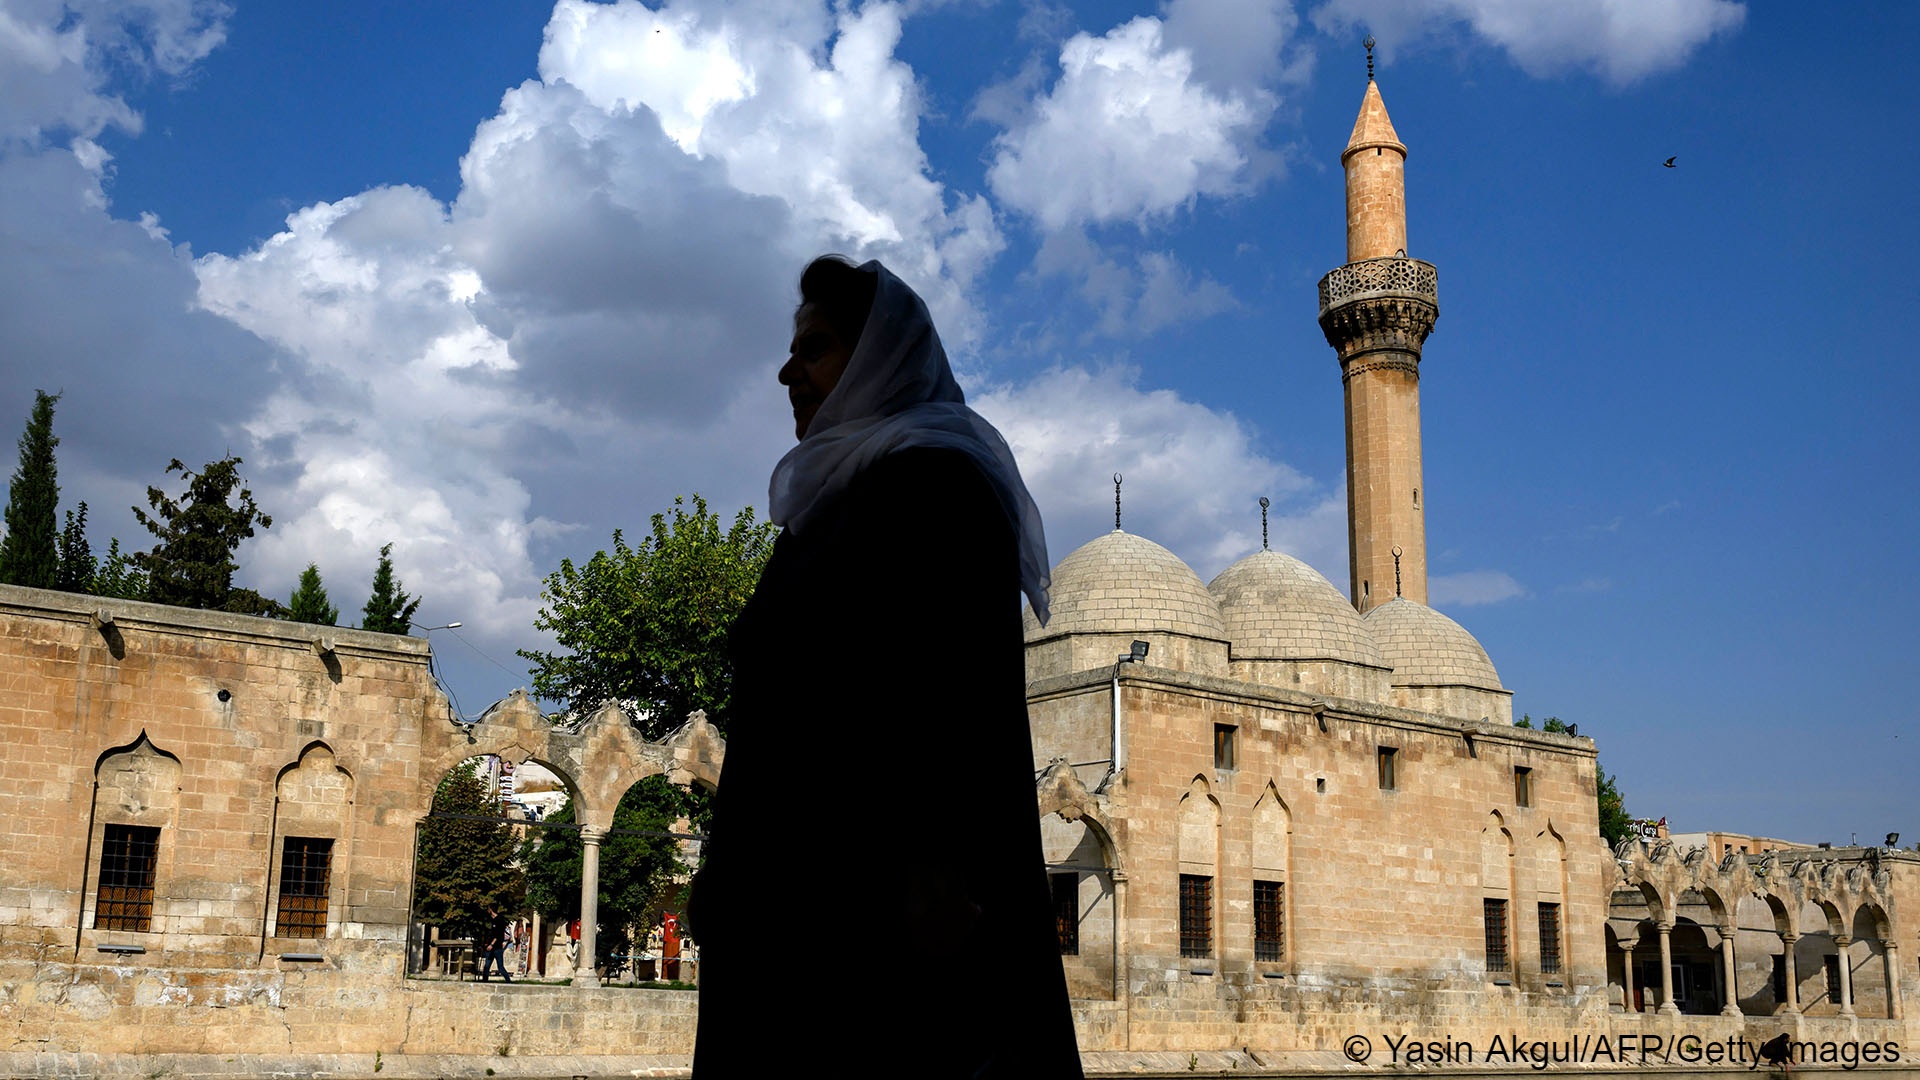 Silhouette of a woman against the background of Ottoman architecture, a minaret and a cloudy blue sky